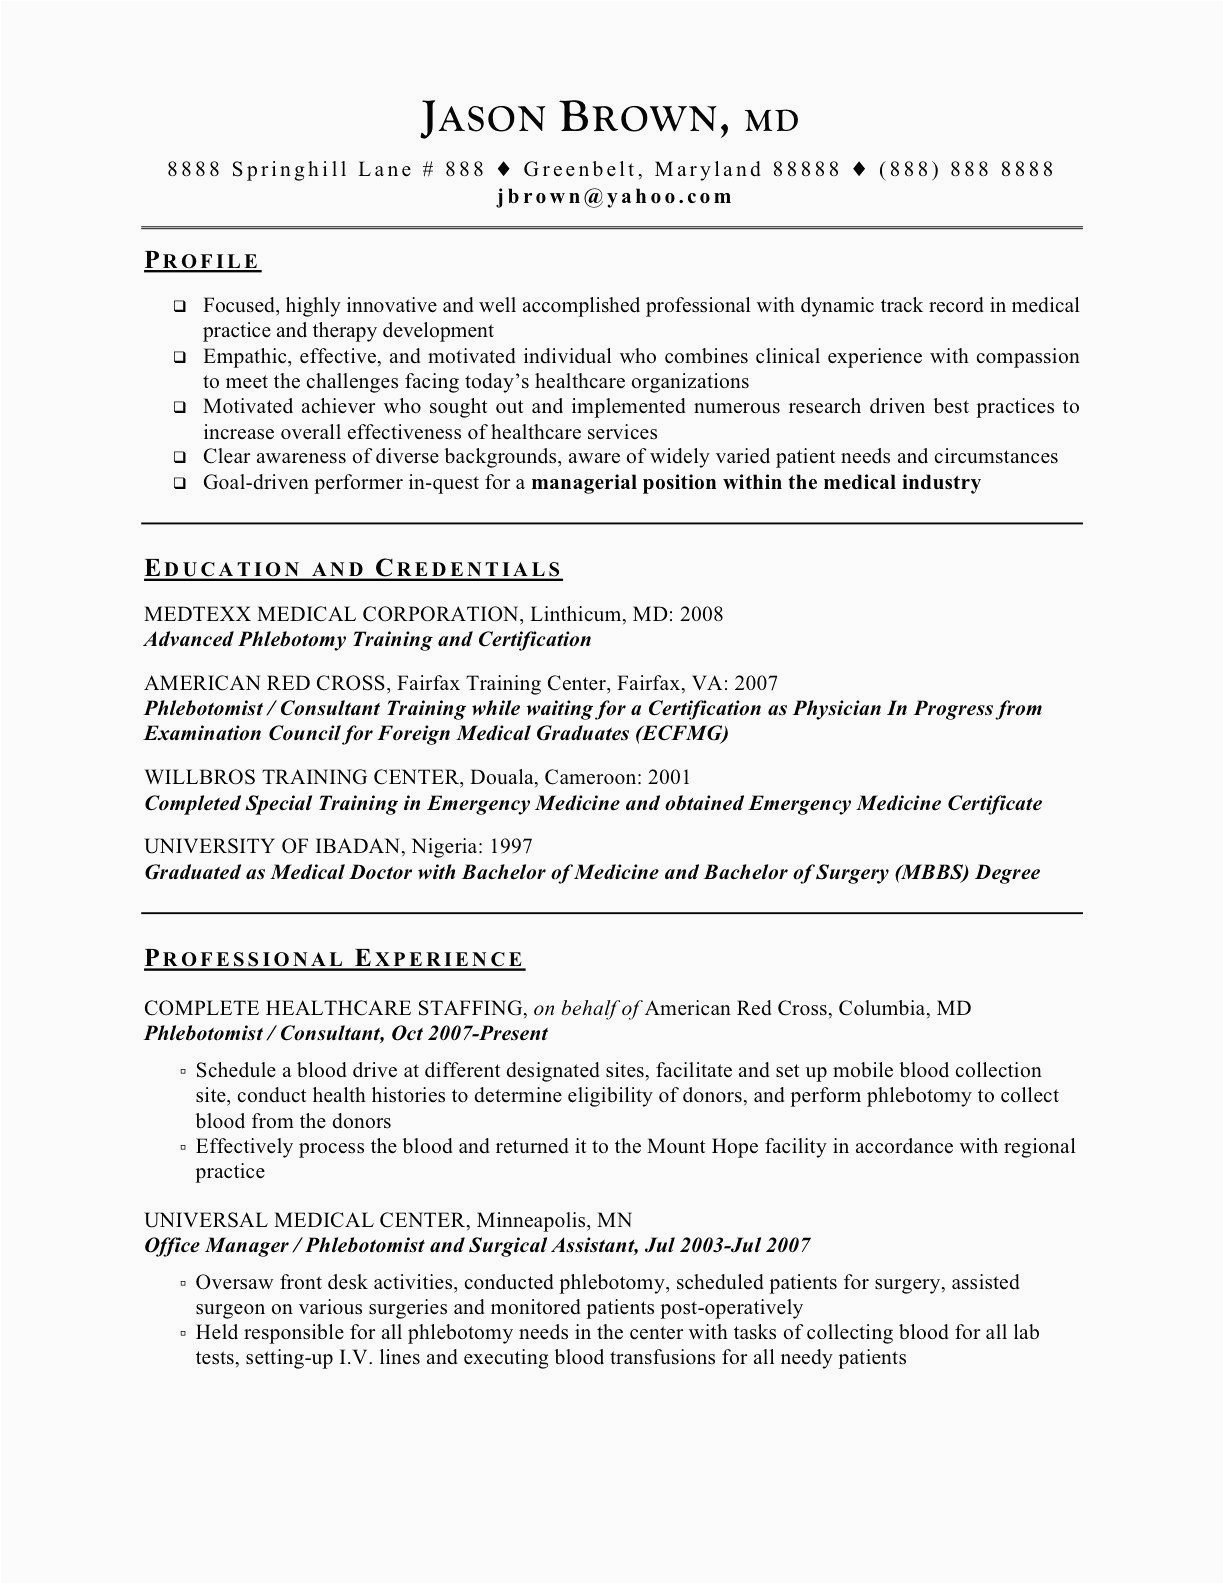 Sample Resume for Phlebotomy with No Experience 25 Entry Level Phlebotomist Resume In 2020